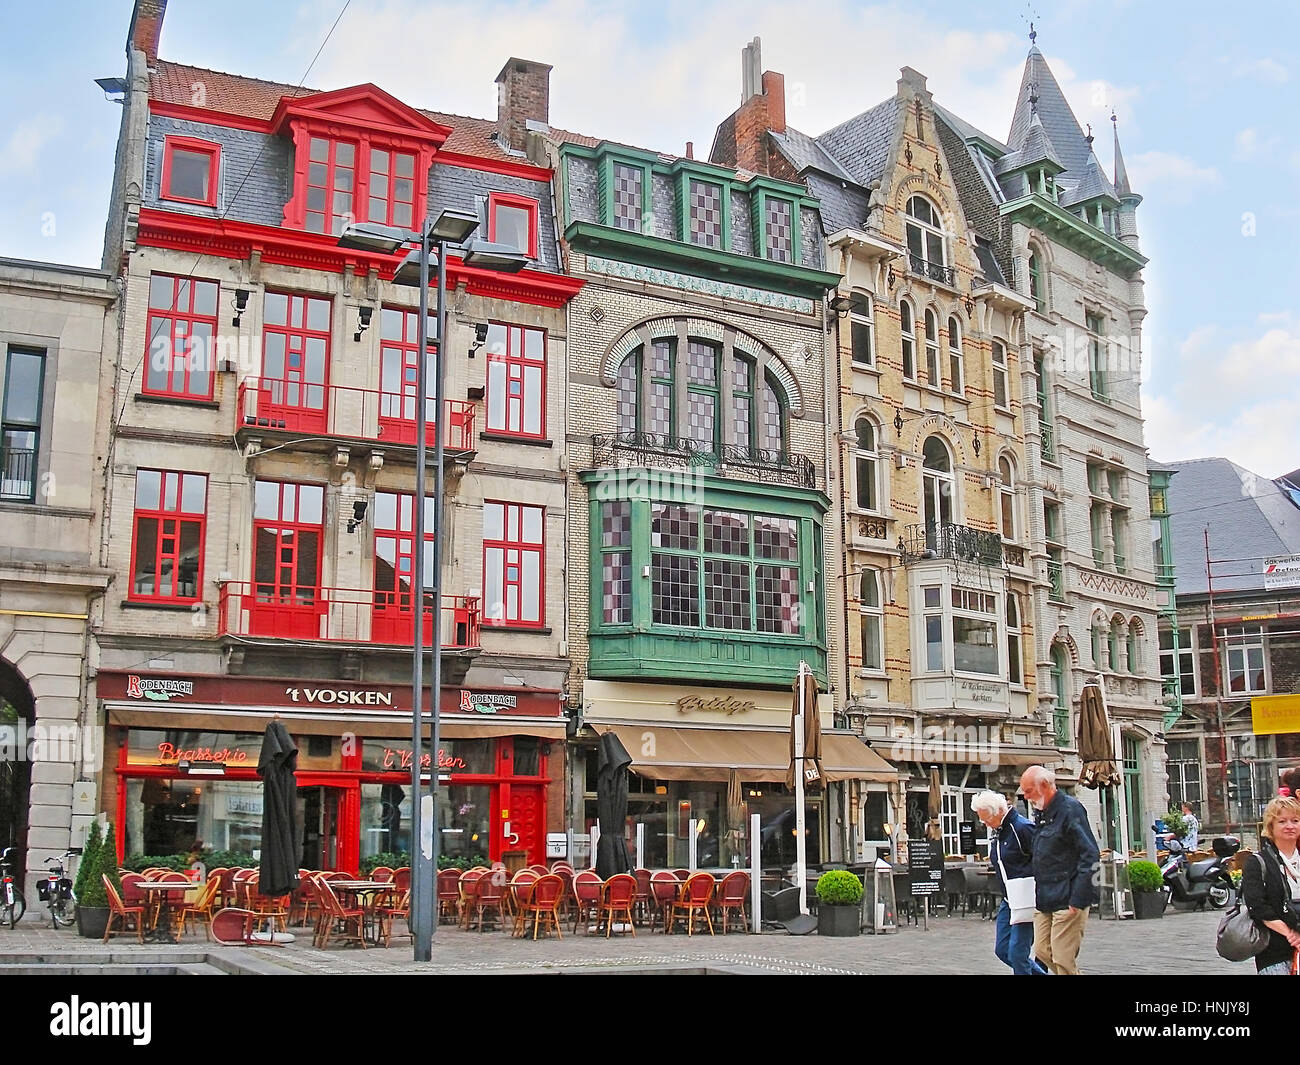 GHENT, BELGIUM - MAY 26, 2011: Sint-Baafsplein Square is full of tourist cafes and luxury restaurants to spend the time in city center and enjoy the l Stock Photo